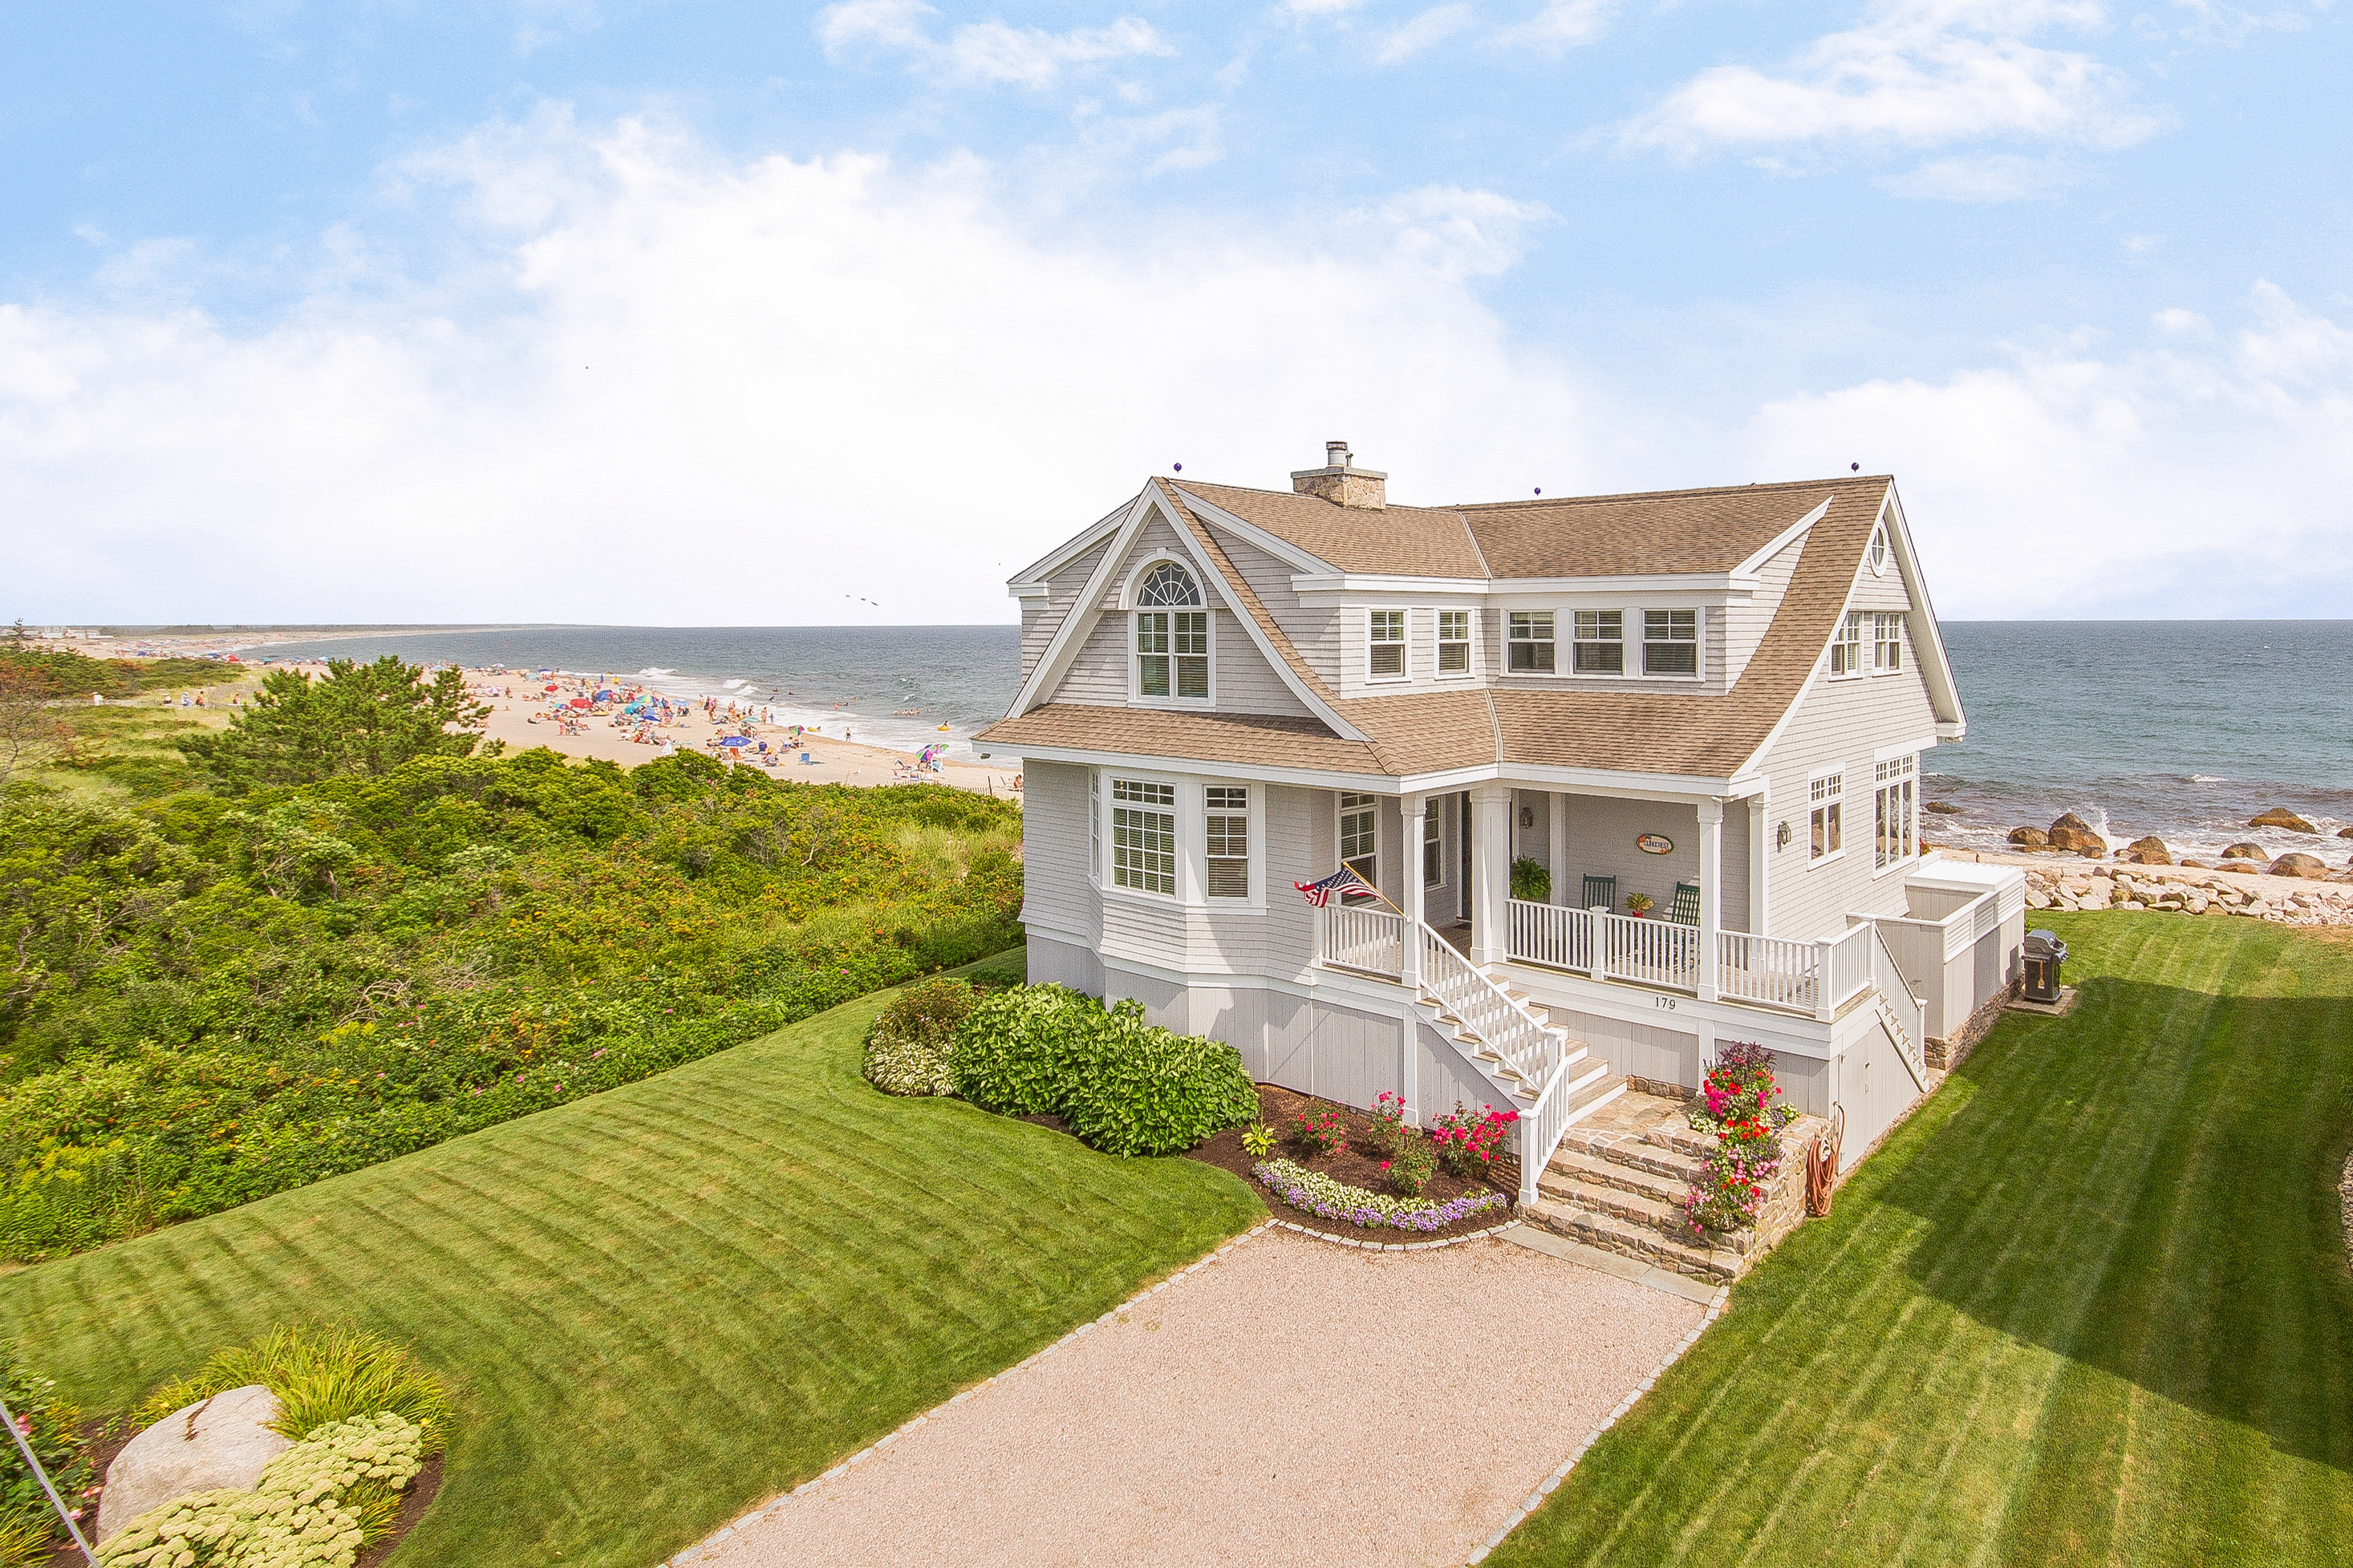 QUONNIE BEACH HOUSE SELLS IN 18 DAYS